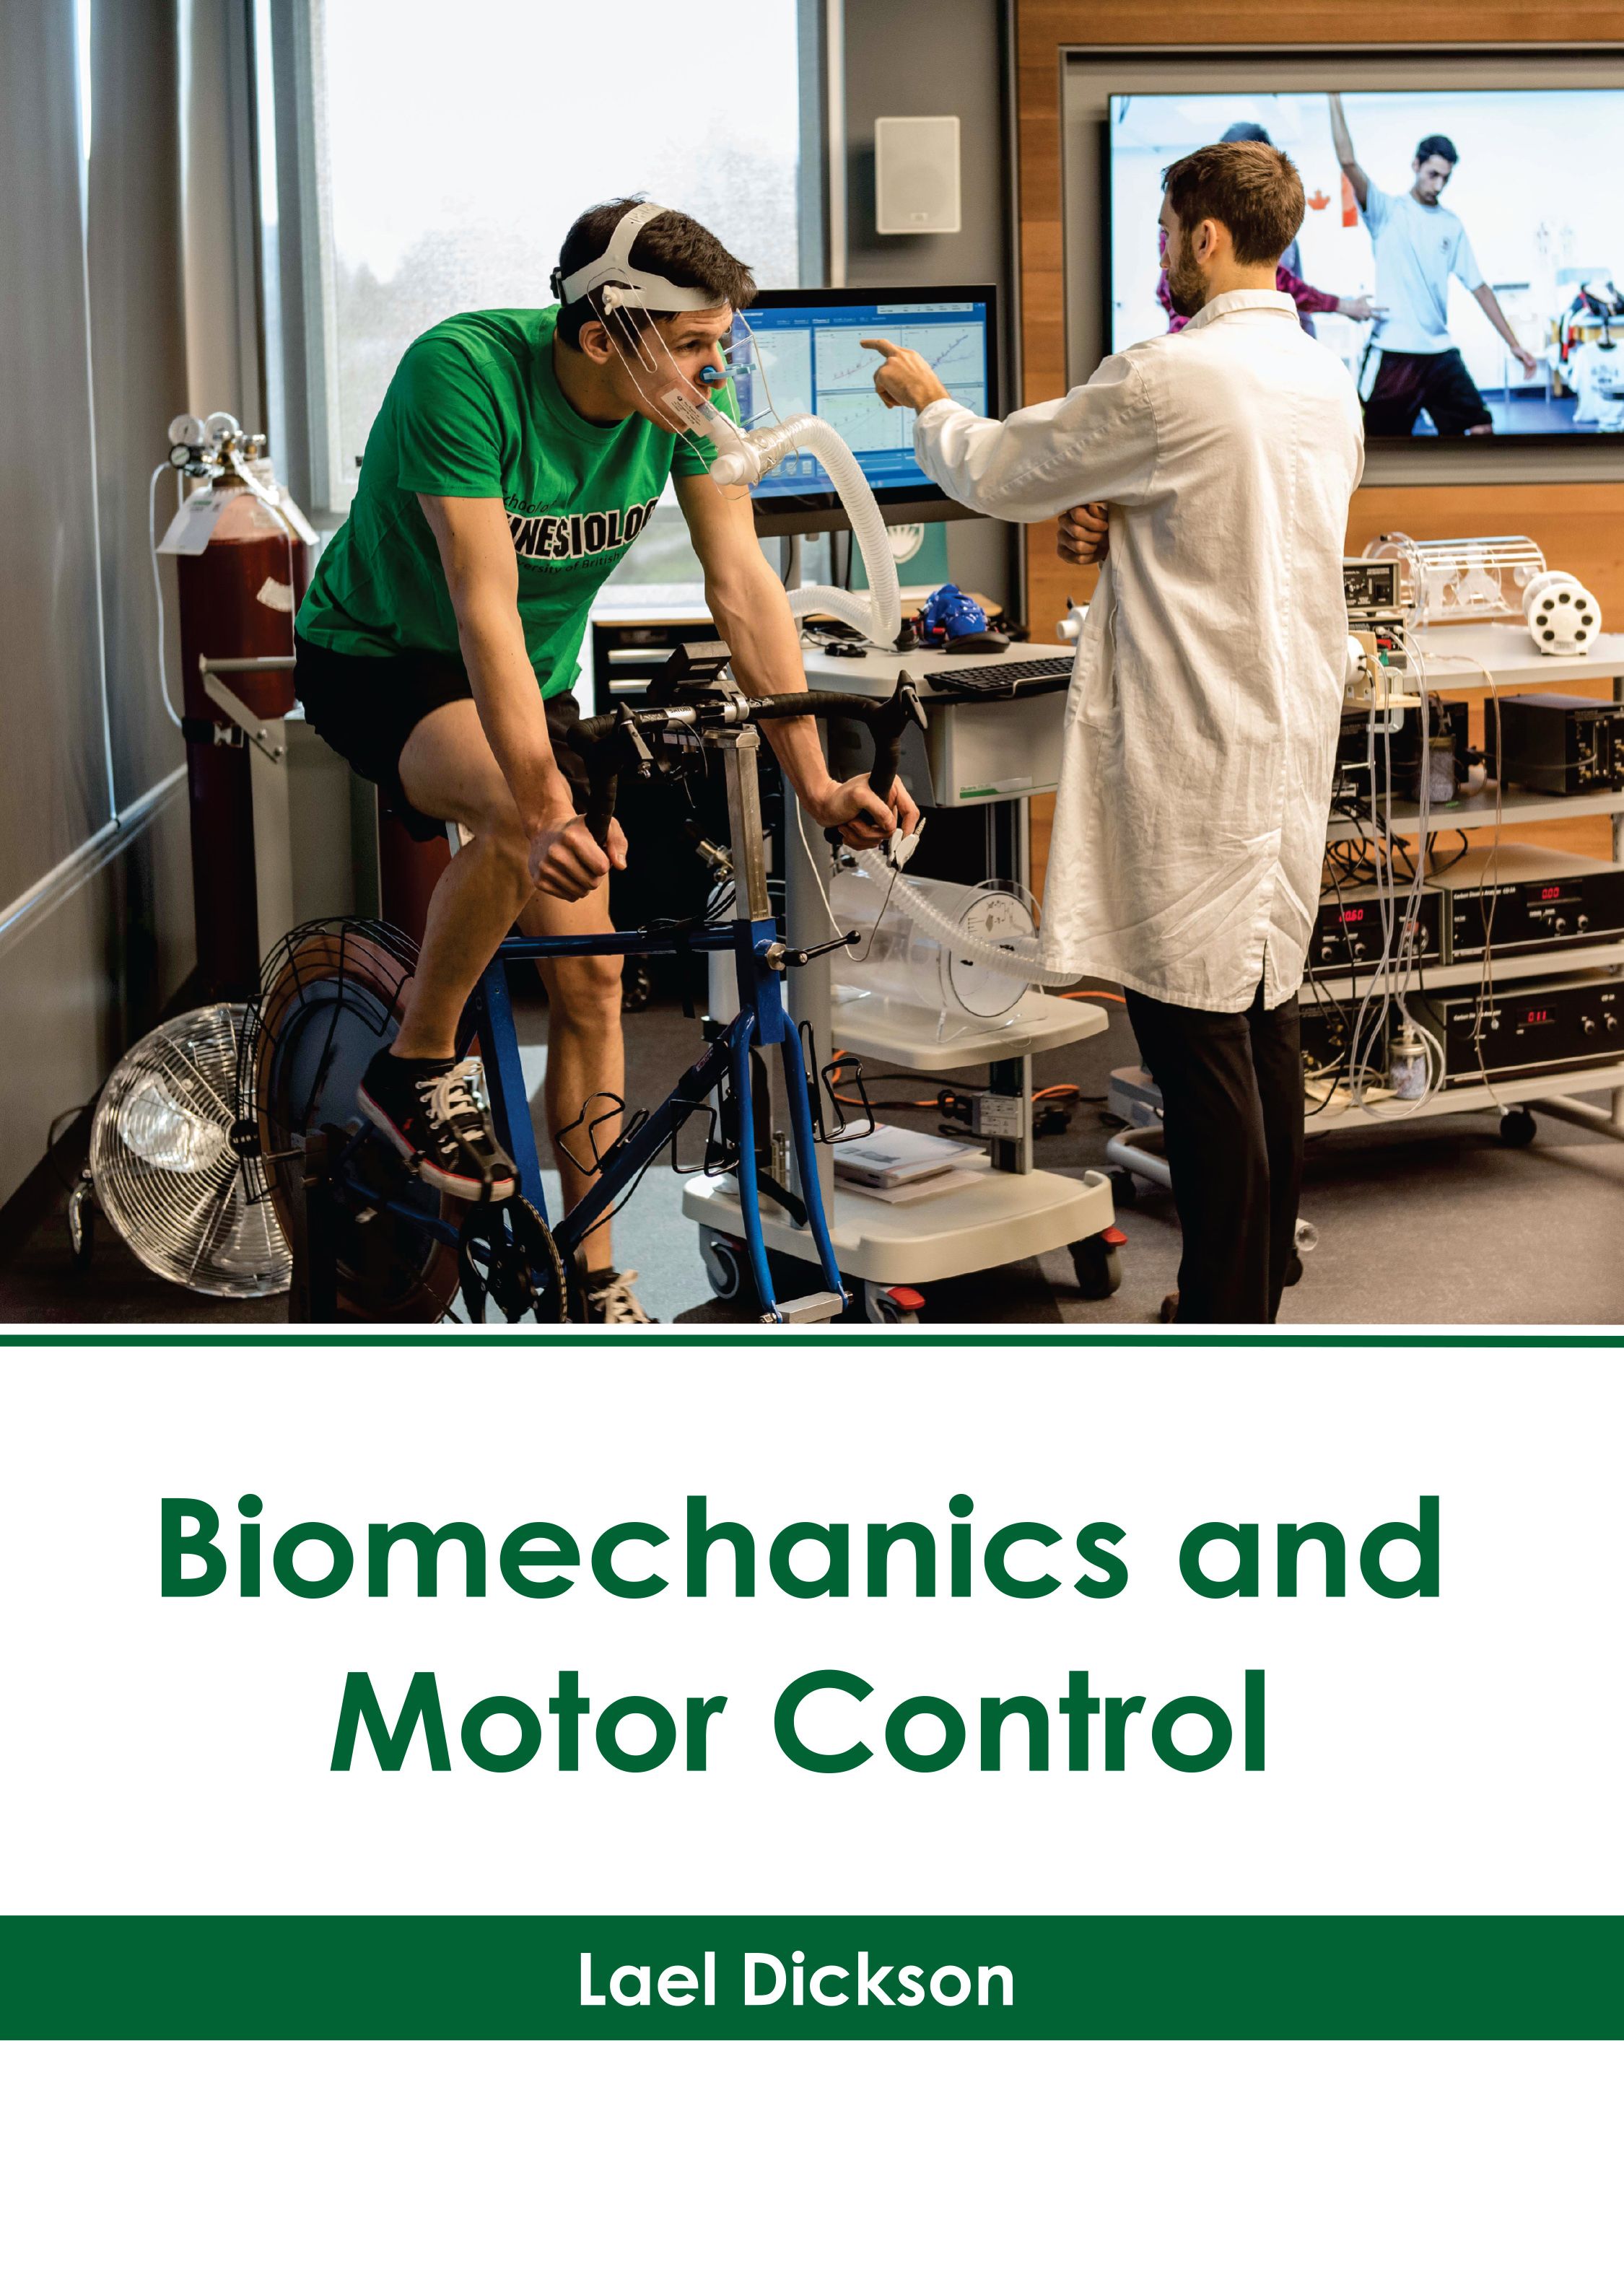 

exclusive-publishers/american-medical-publishers/biomechanics-and-motor-control-9781639279319